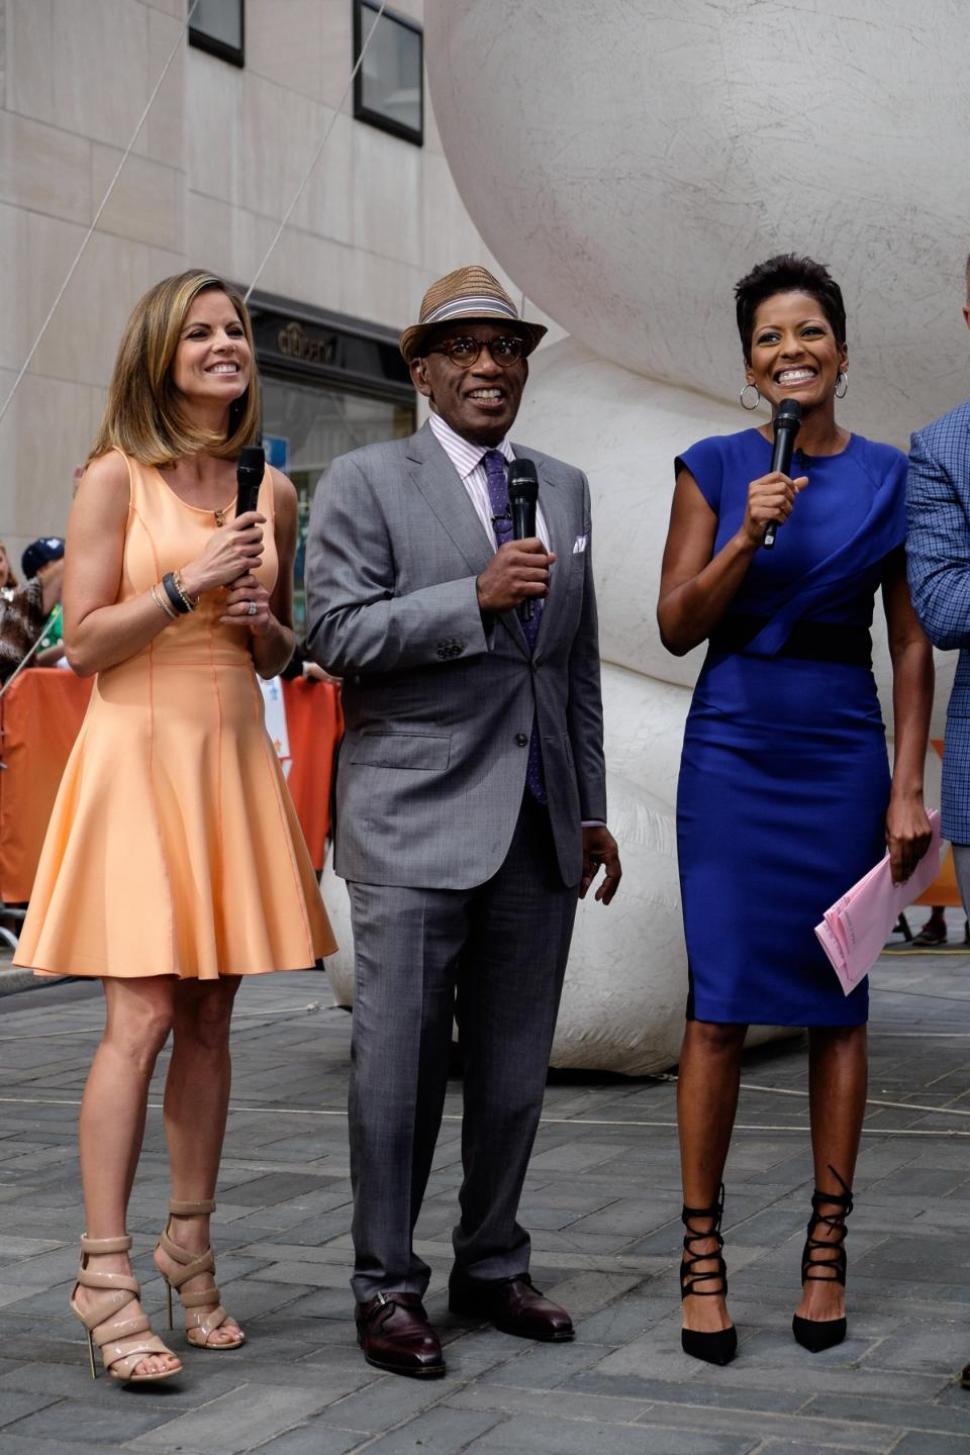 Al Roker (center) says he stays in shape by riding his bike around town.